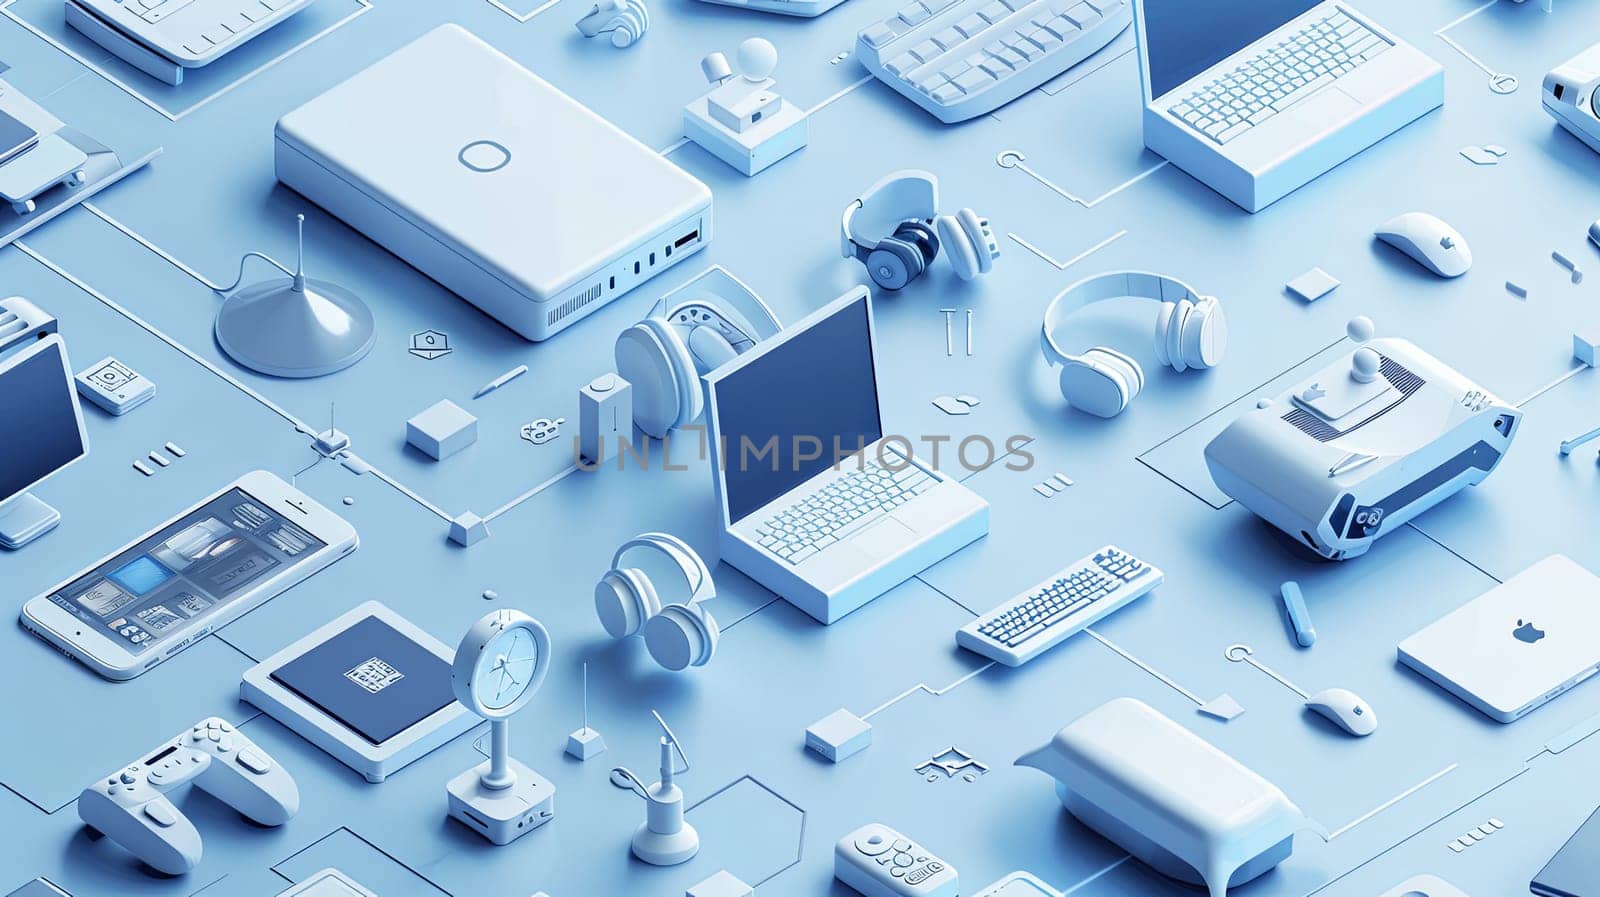 Isometric icon of computers, laptops, liaisons, and technology equipment arranged on a blue surface for computer service, tech repair, or cloud storage purposes.